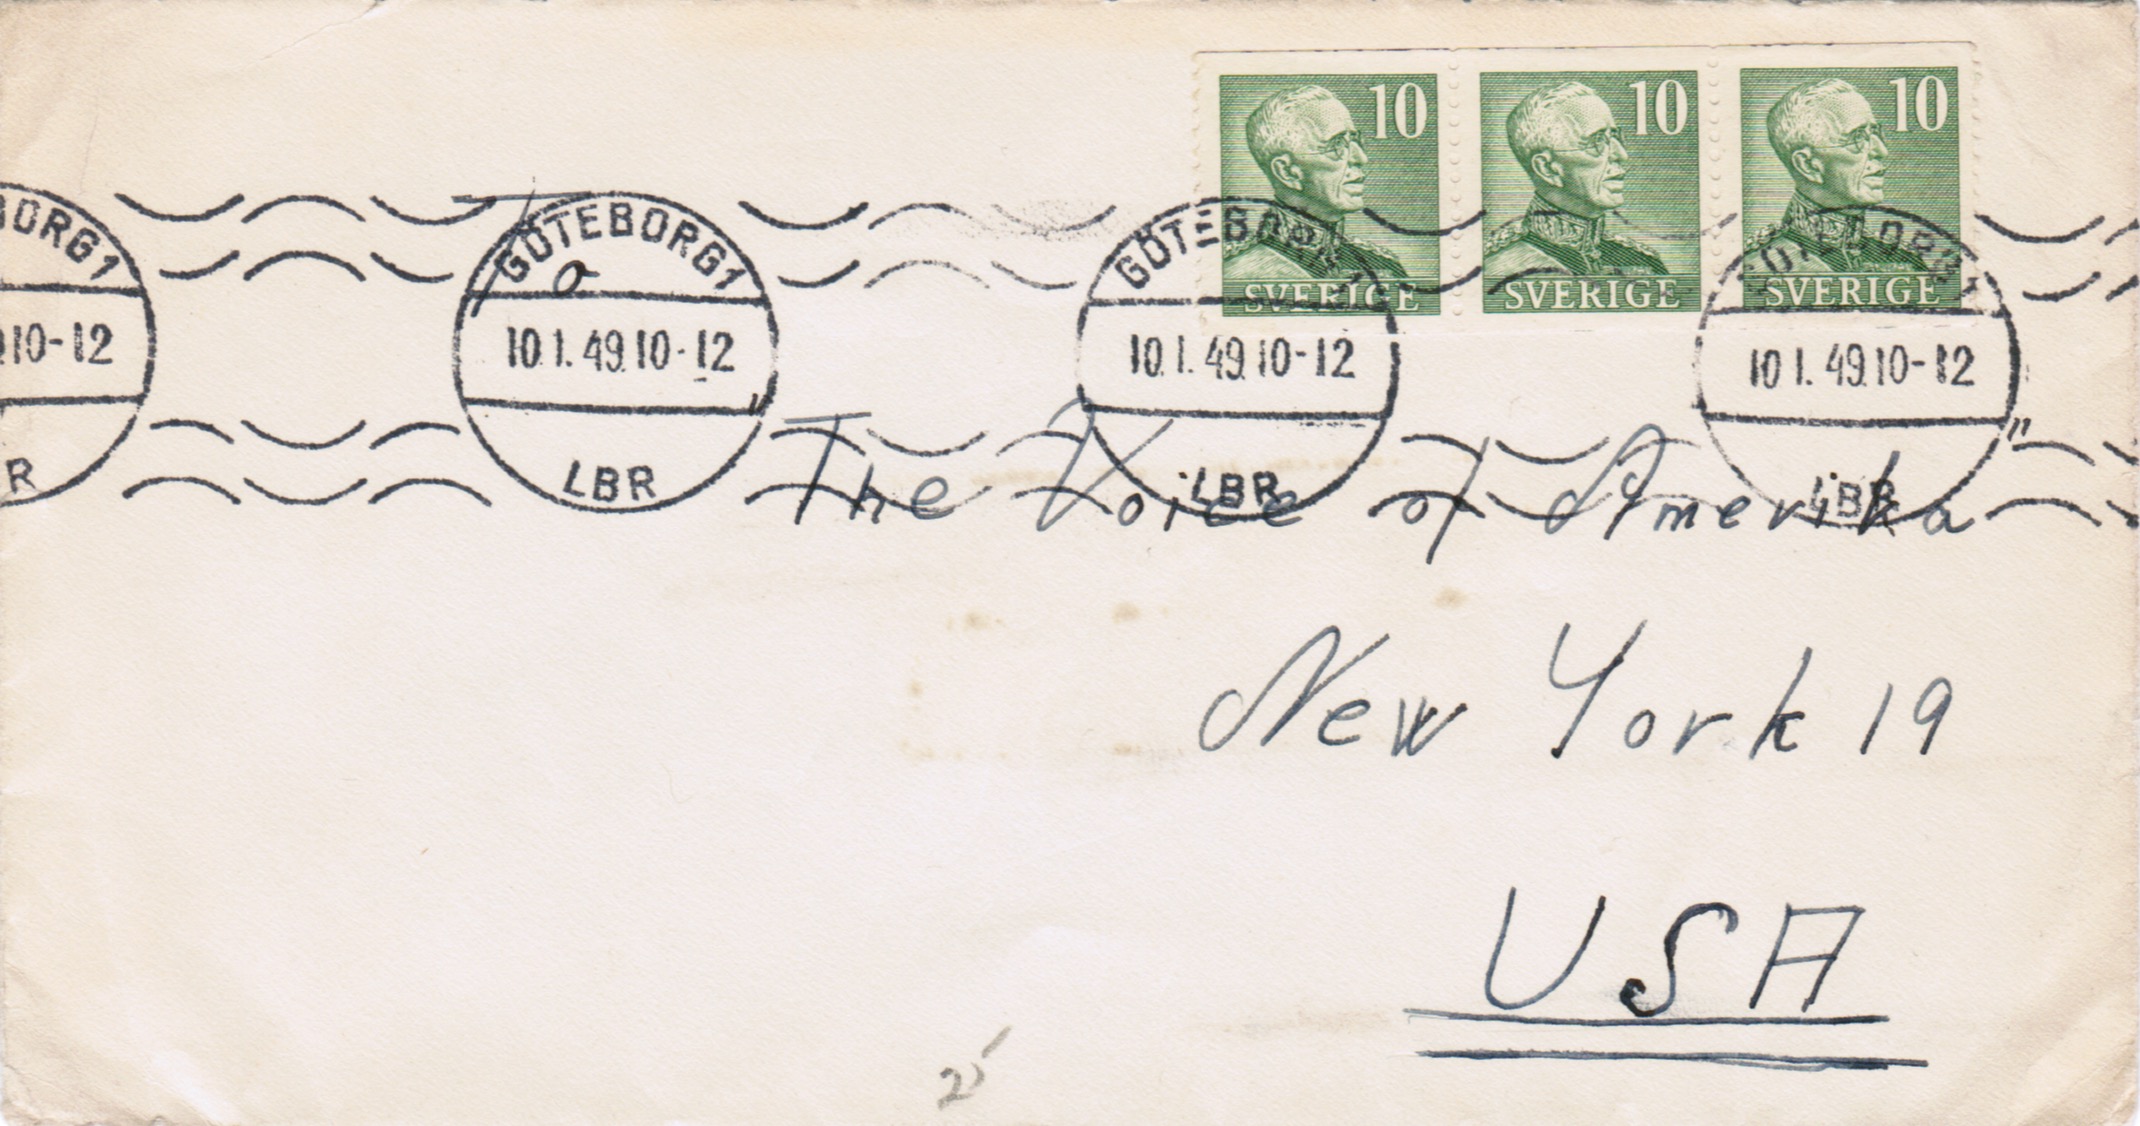 Envelope for a letter sent to The Voice of America (Amerika) I New York from Güteborg Sweden January 10 1949